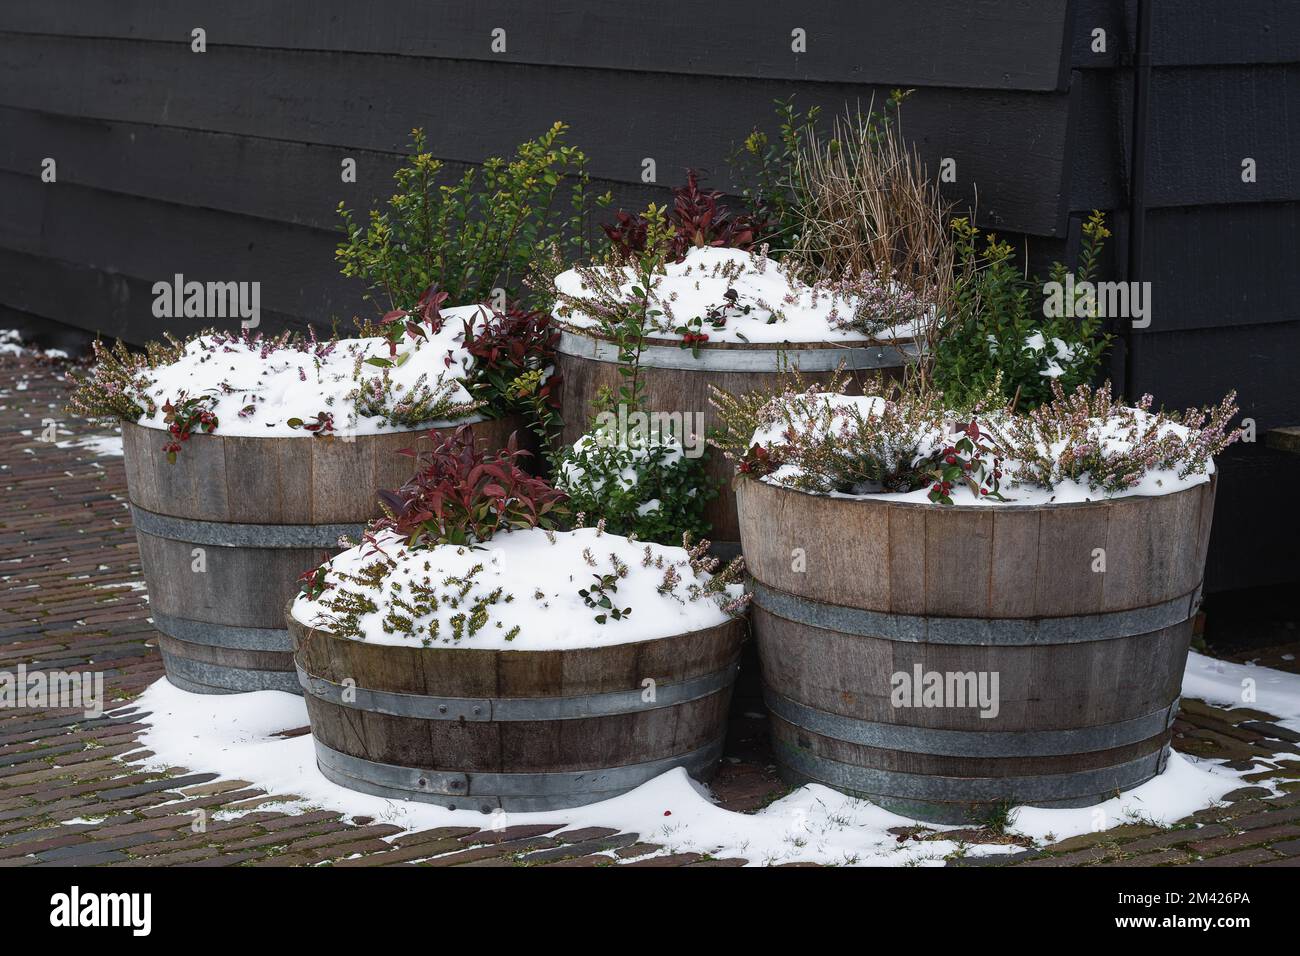 Green plants growing in wooden barrels against the background of a wooden black wall, powdered with snow. Stock Photo